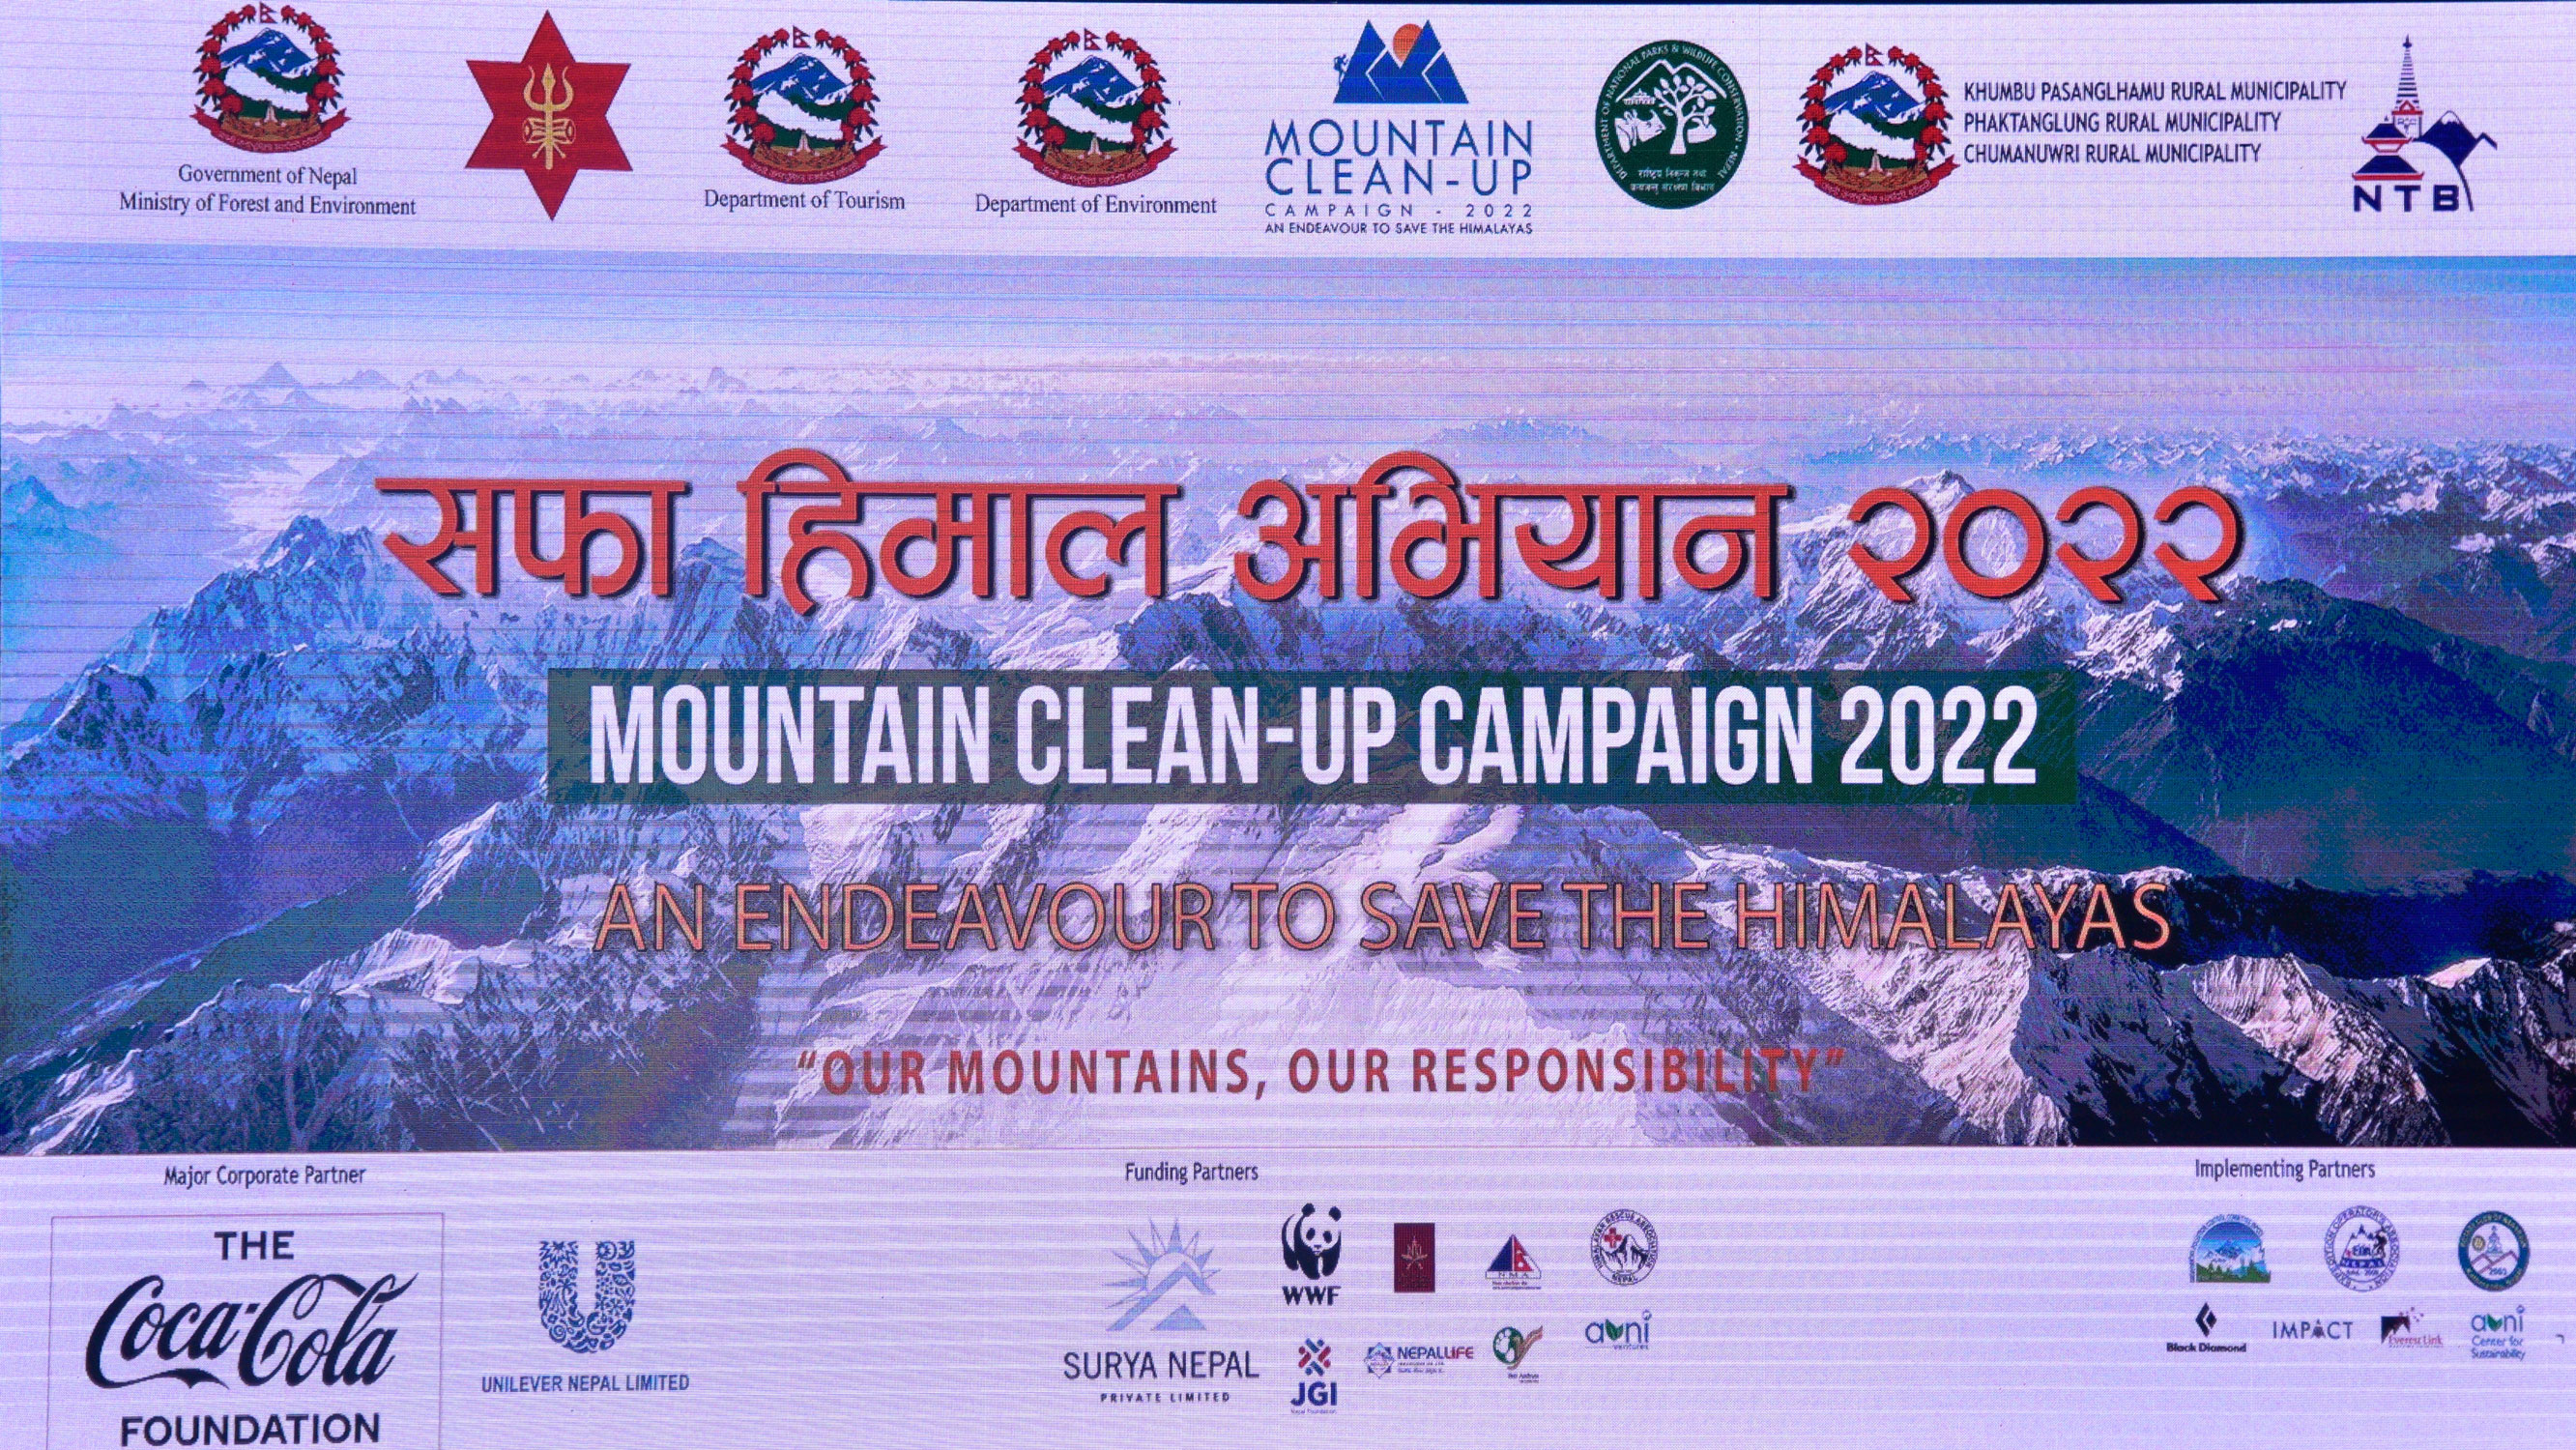 JGI provides Rs 1.5 million to NA for Mountain Cleaning Campaign